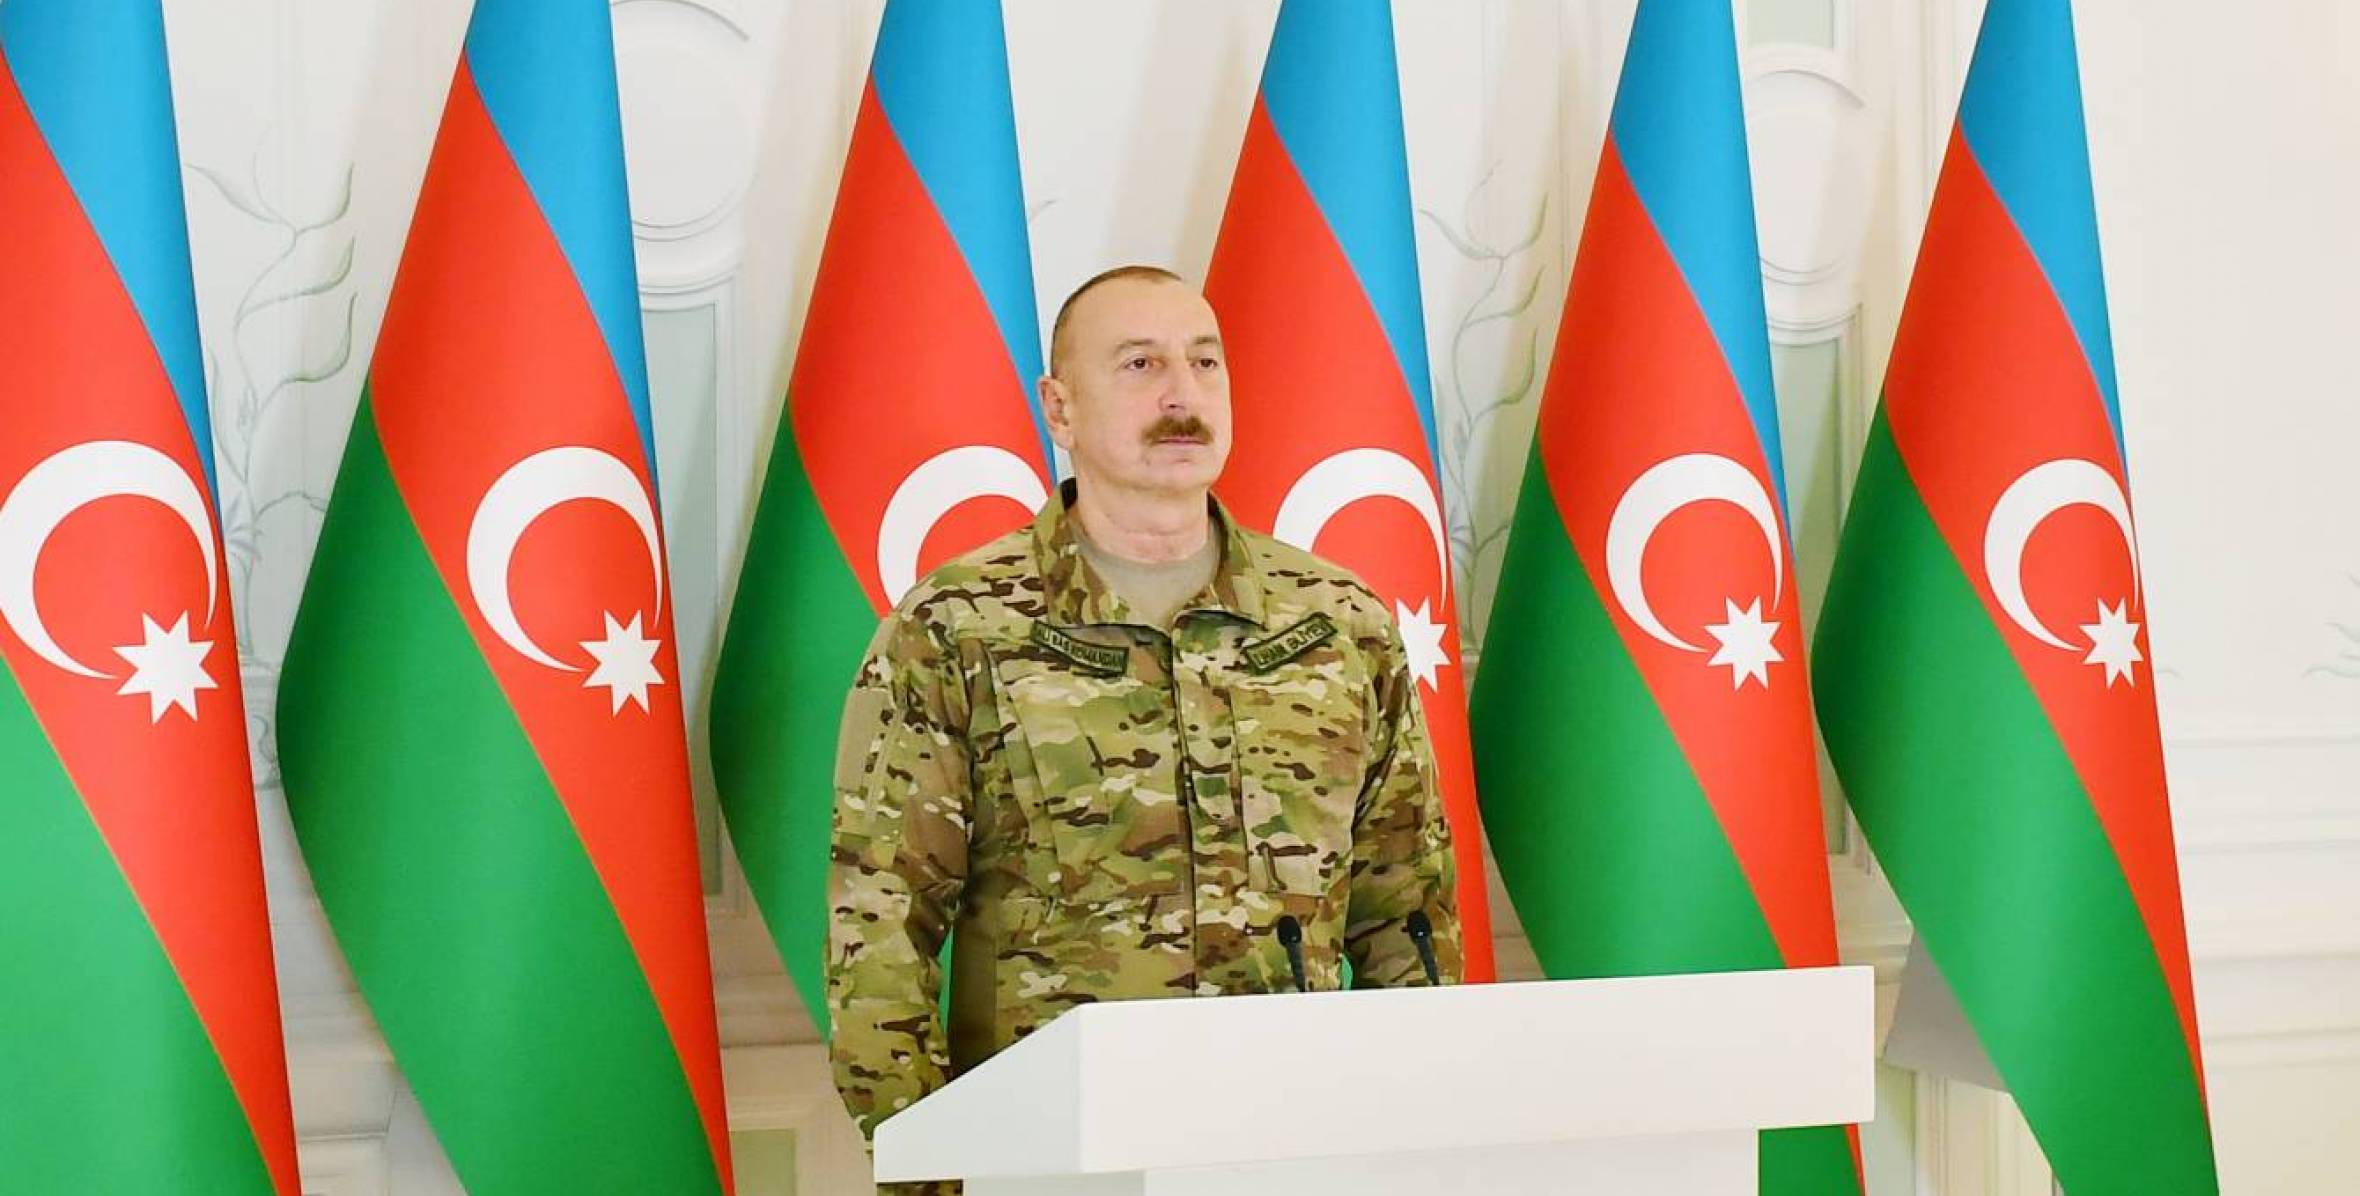 Speech by Ilham Aliyev at the event organized on the occasion of Victory Day in Shusha